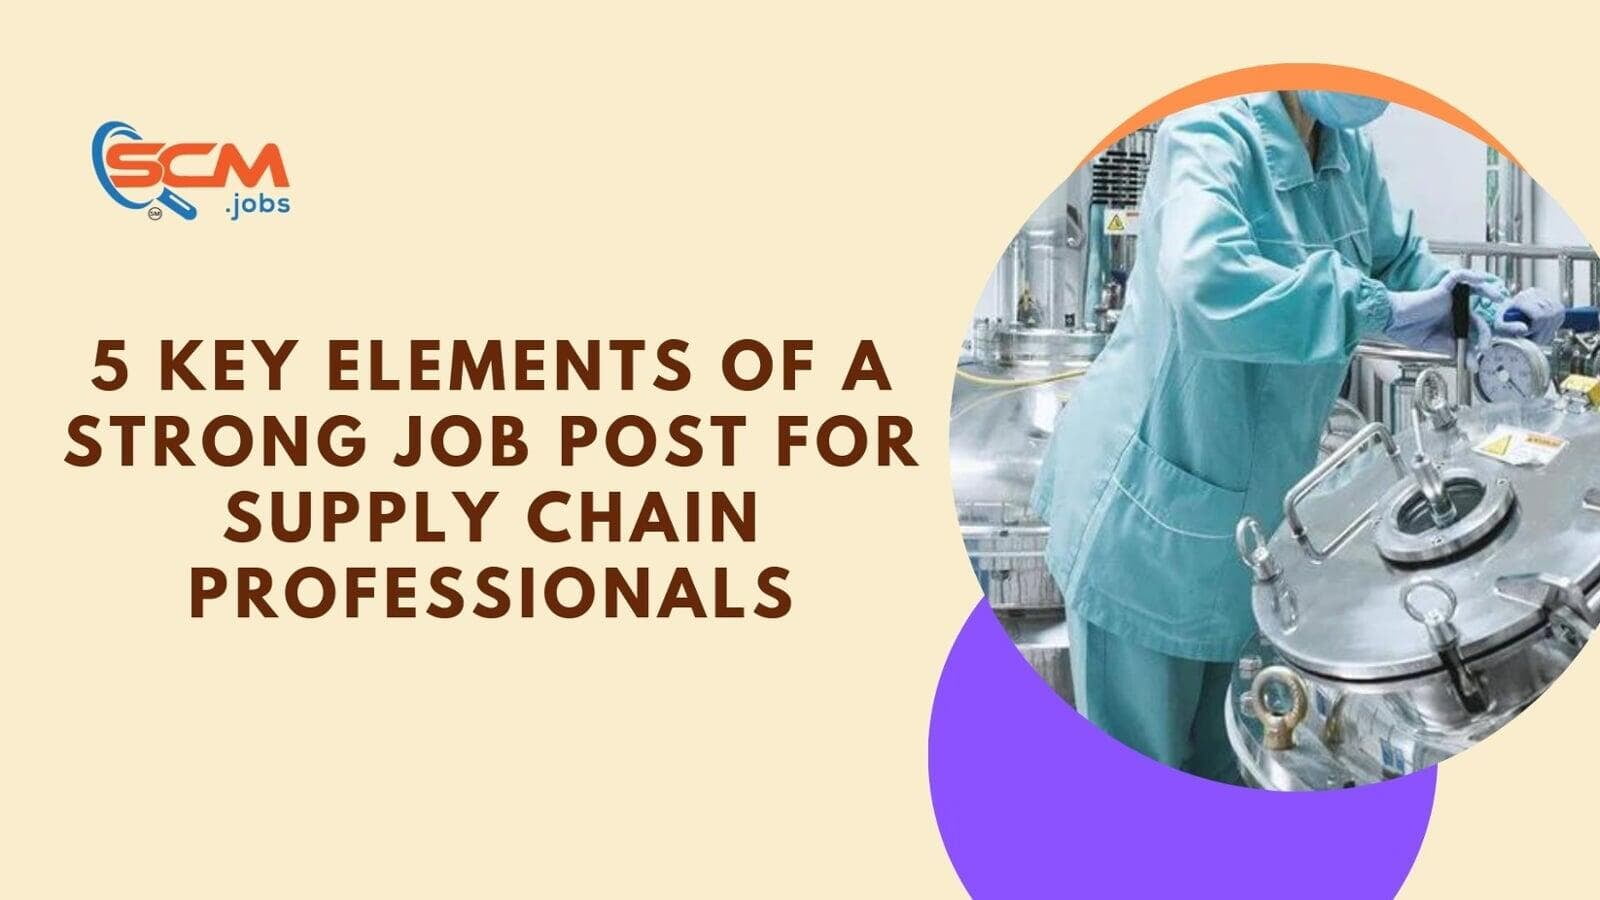 5 Key Elements of a Strong Job Post for Supply Chain Professionals